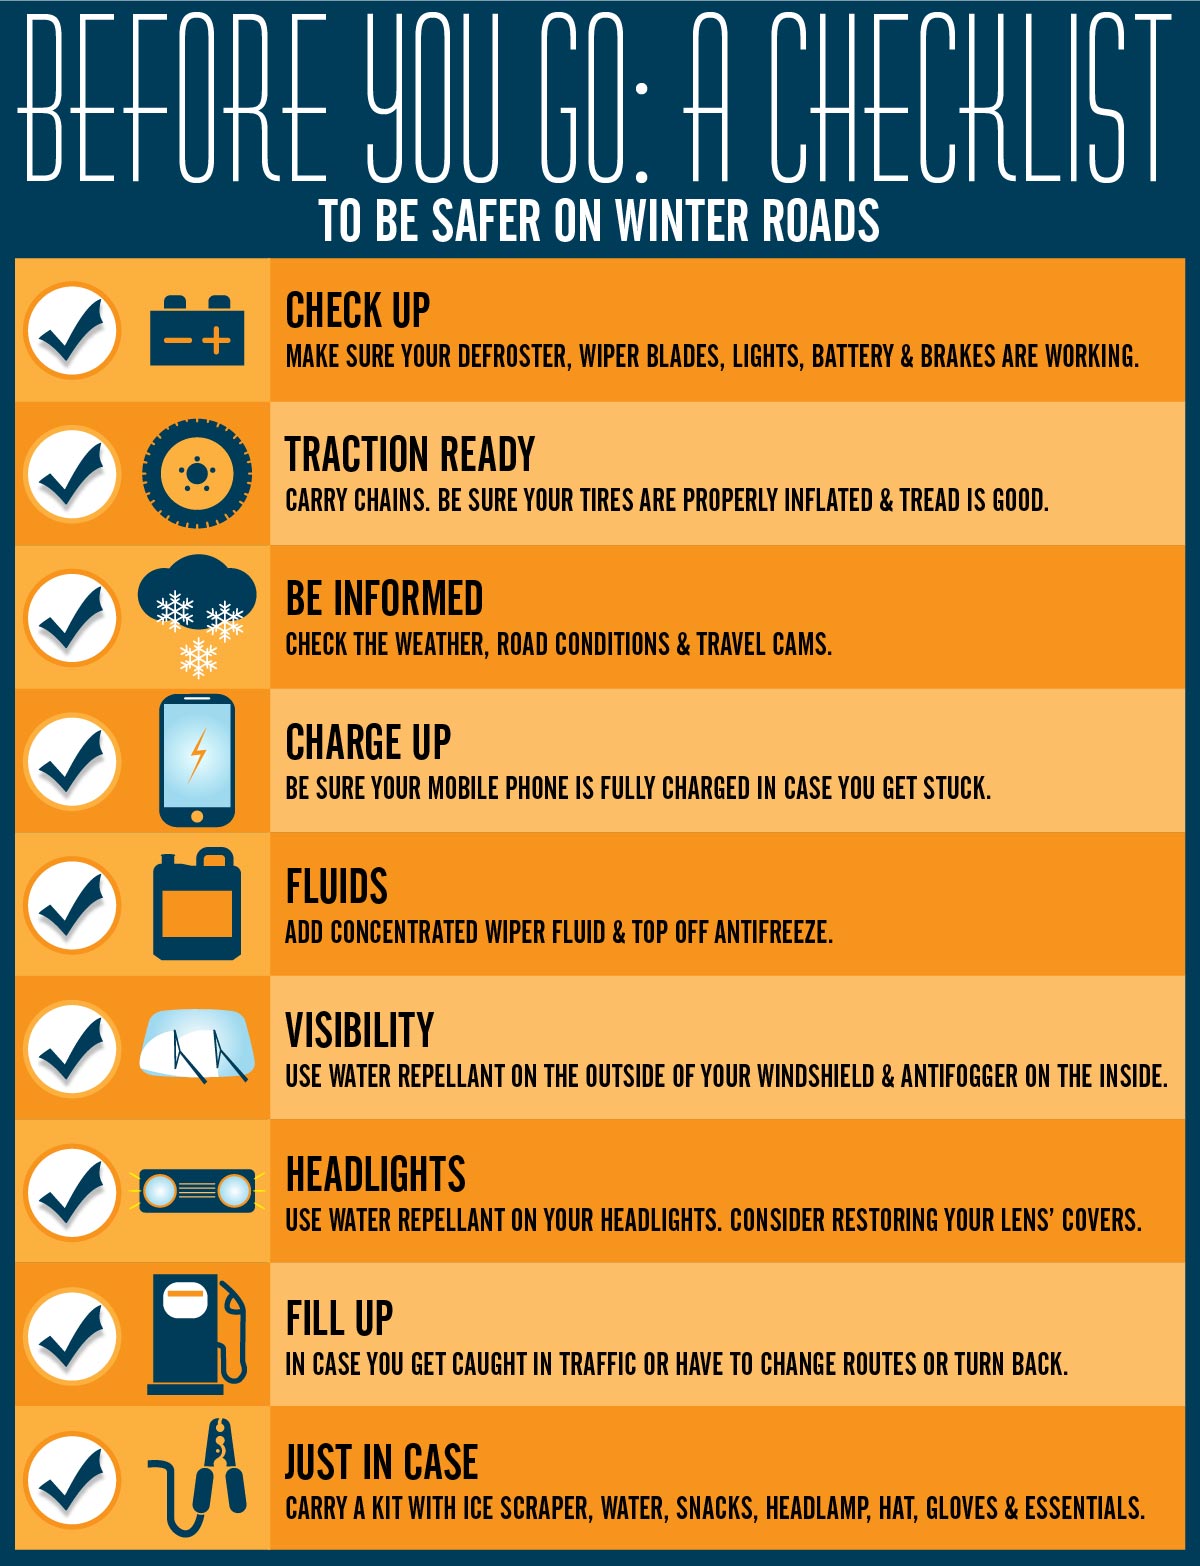 Before You Go Checklist for Winter Driving